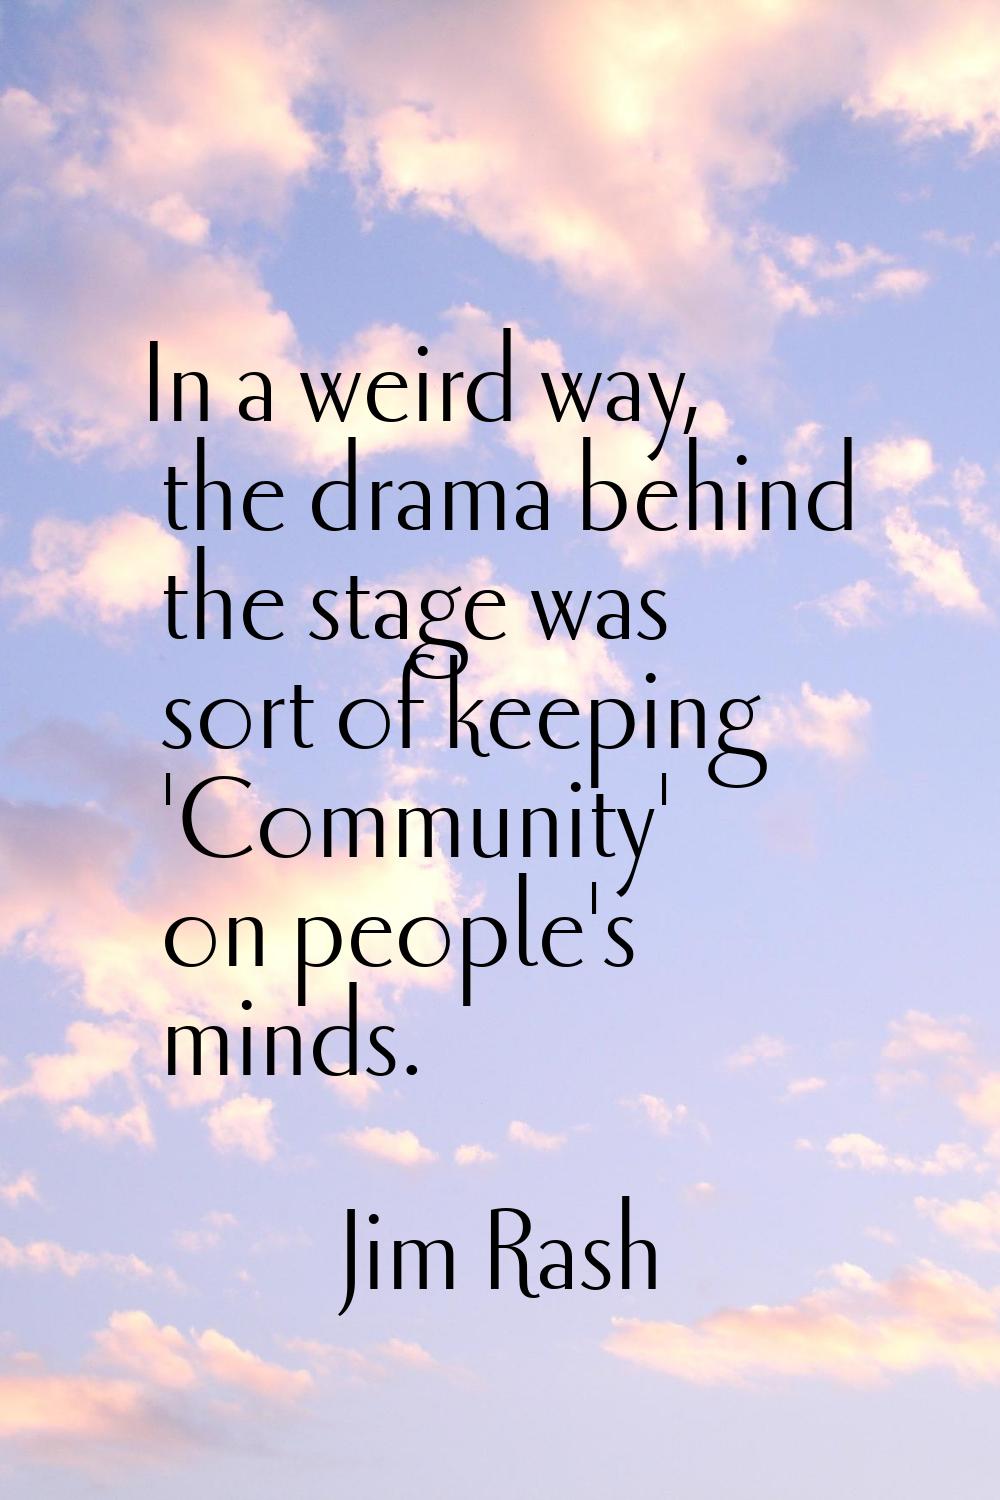 In a weird way, the drama behind the stage was sort of keeping 'Community' on people's minds.